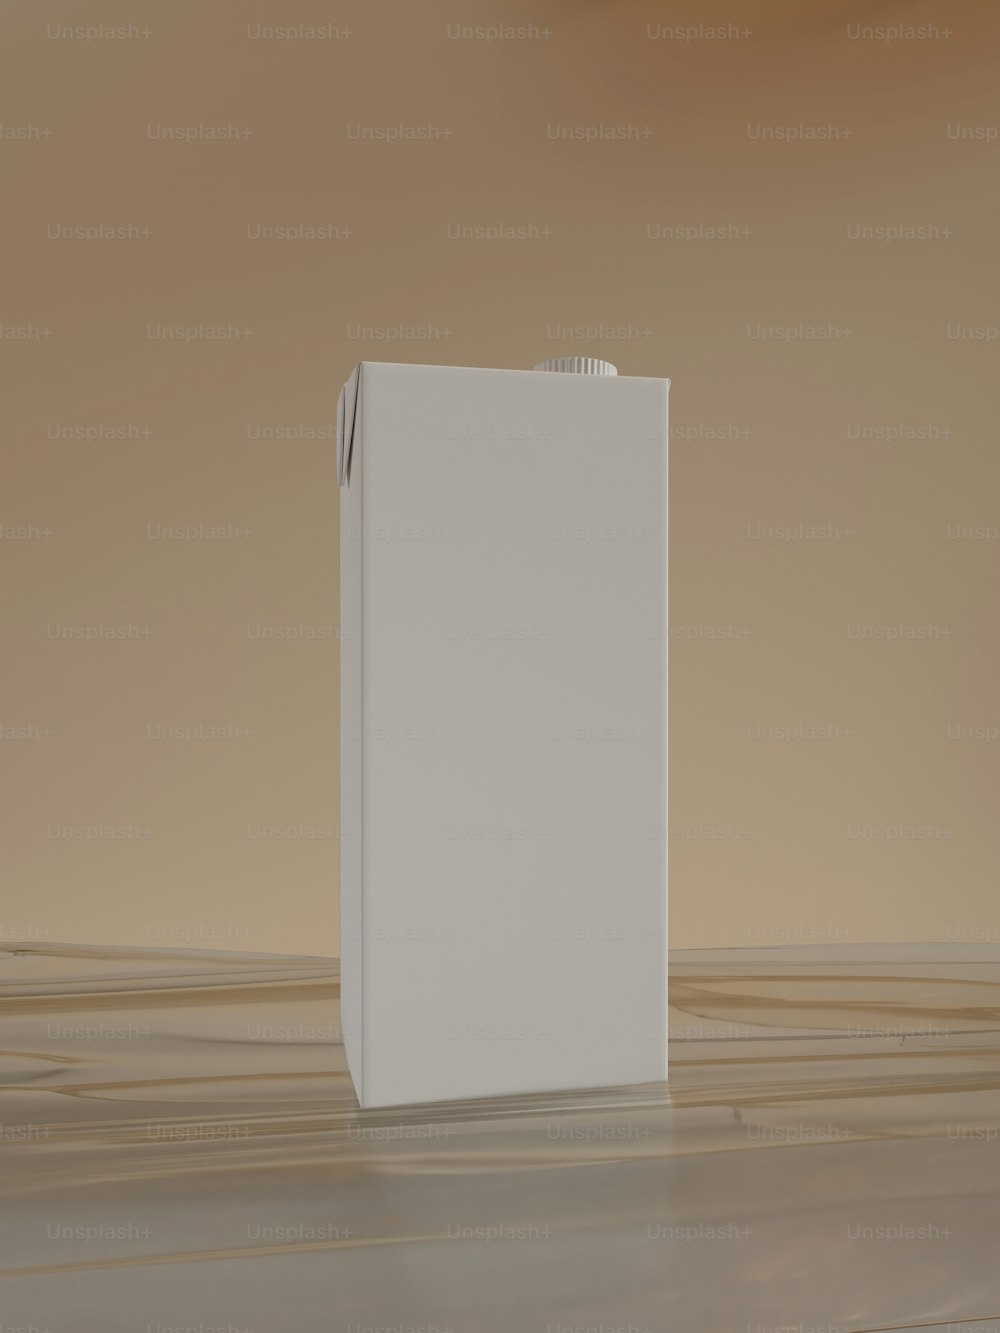 a white box sitting on top of a wooden floor